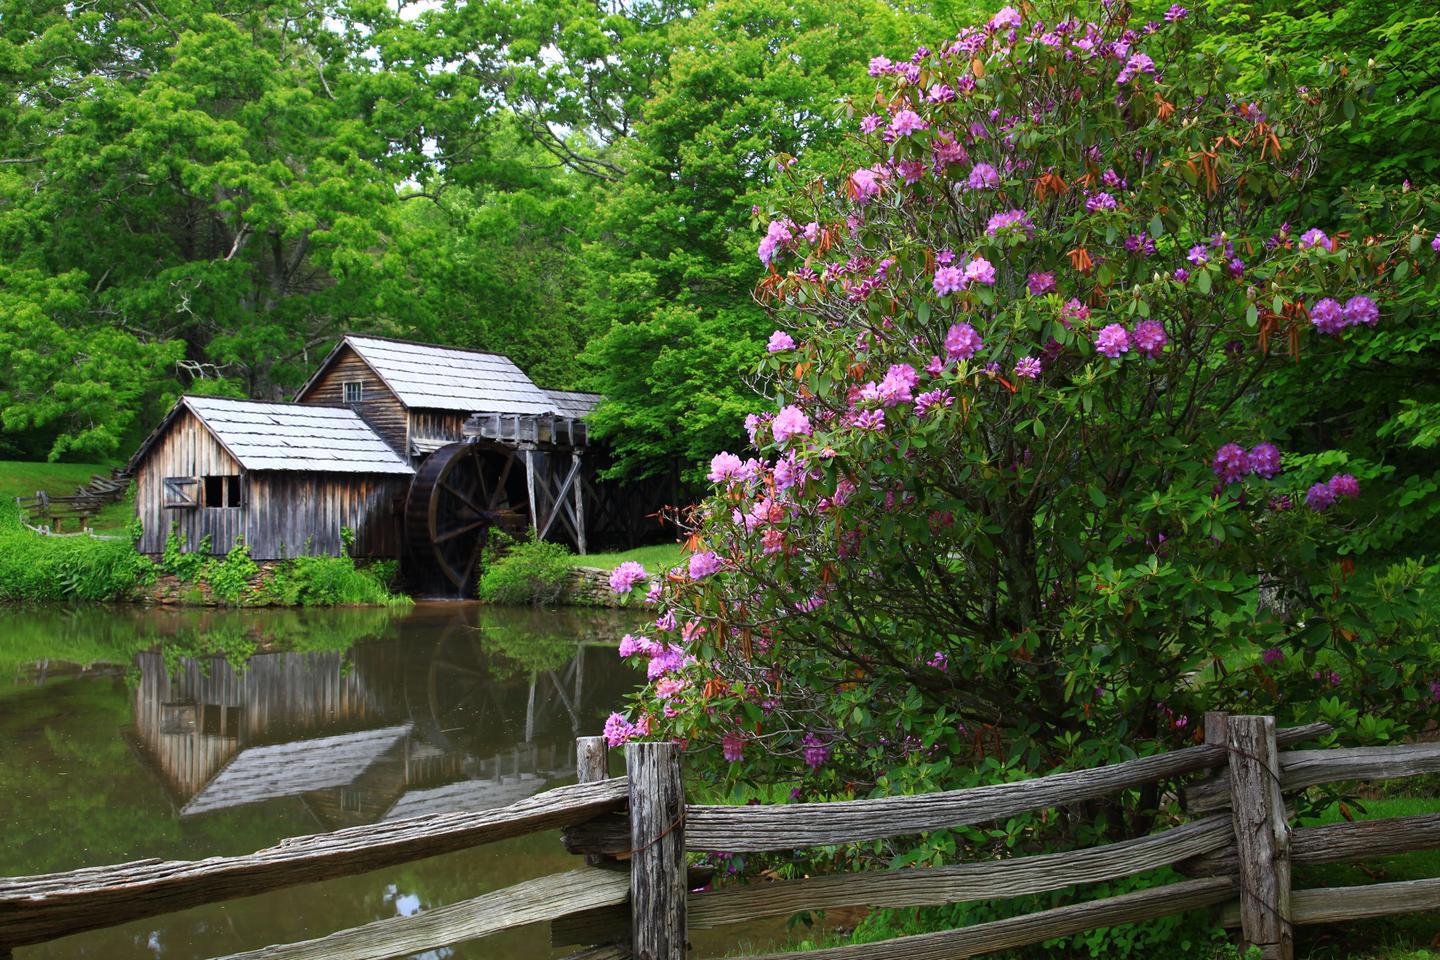 Mabry MillLocated in Virginia's Plateau district, picturesque Mabry Mill is one of the most iconic features of the Blue Ridge Parkway